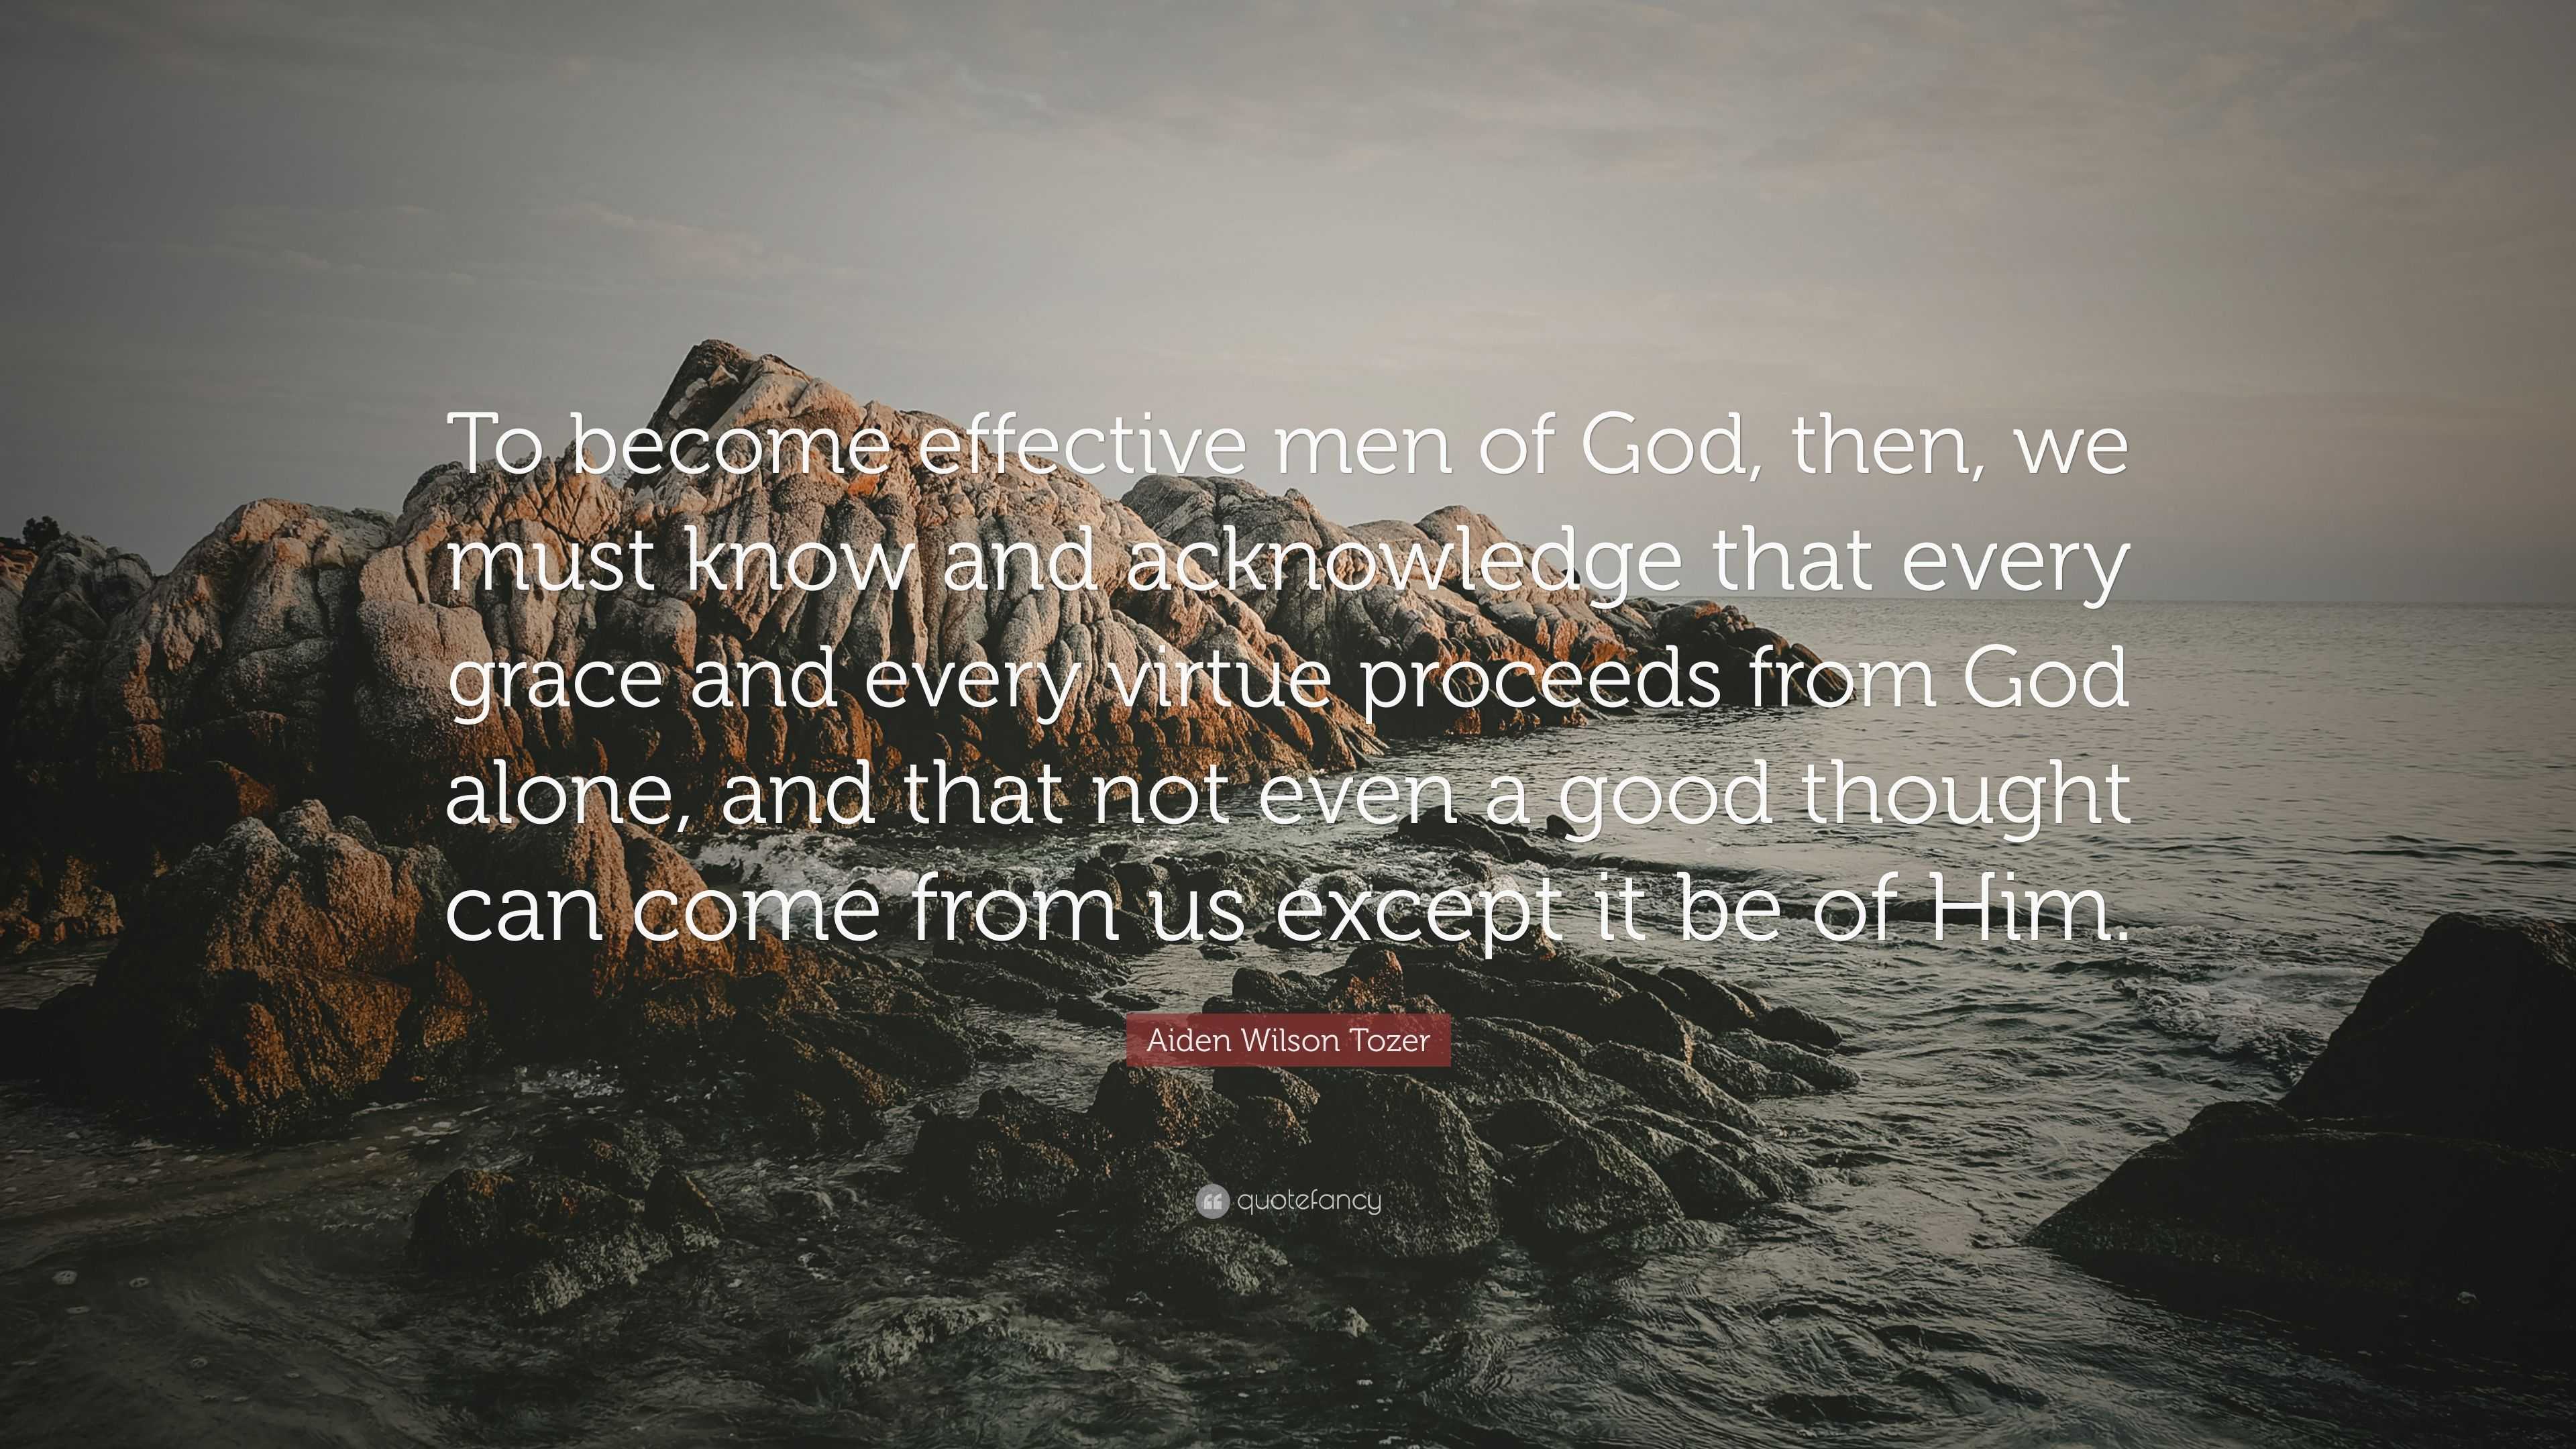 Aiden Wilson Tozer Quote: “To become effective men of God, then, we ...